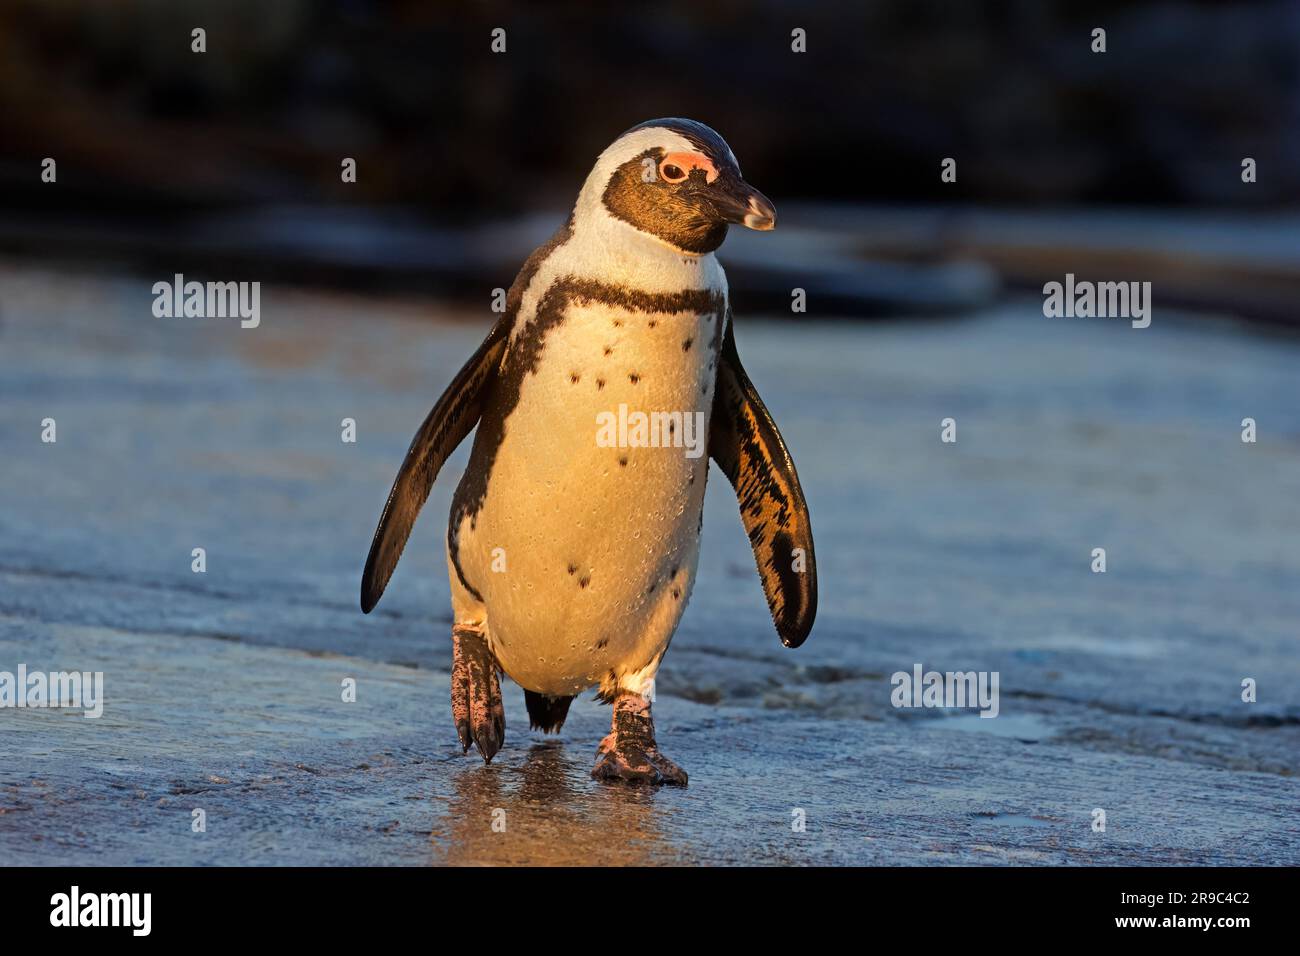 An African penguin (Spheniscus demersus) standing on the beach, South Africa Stock Photo